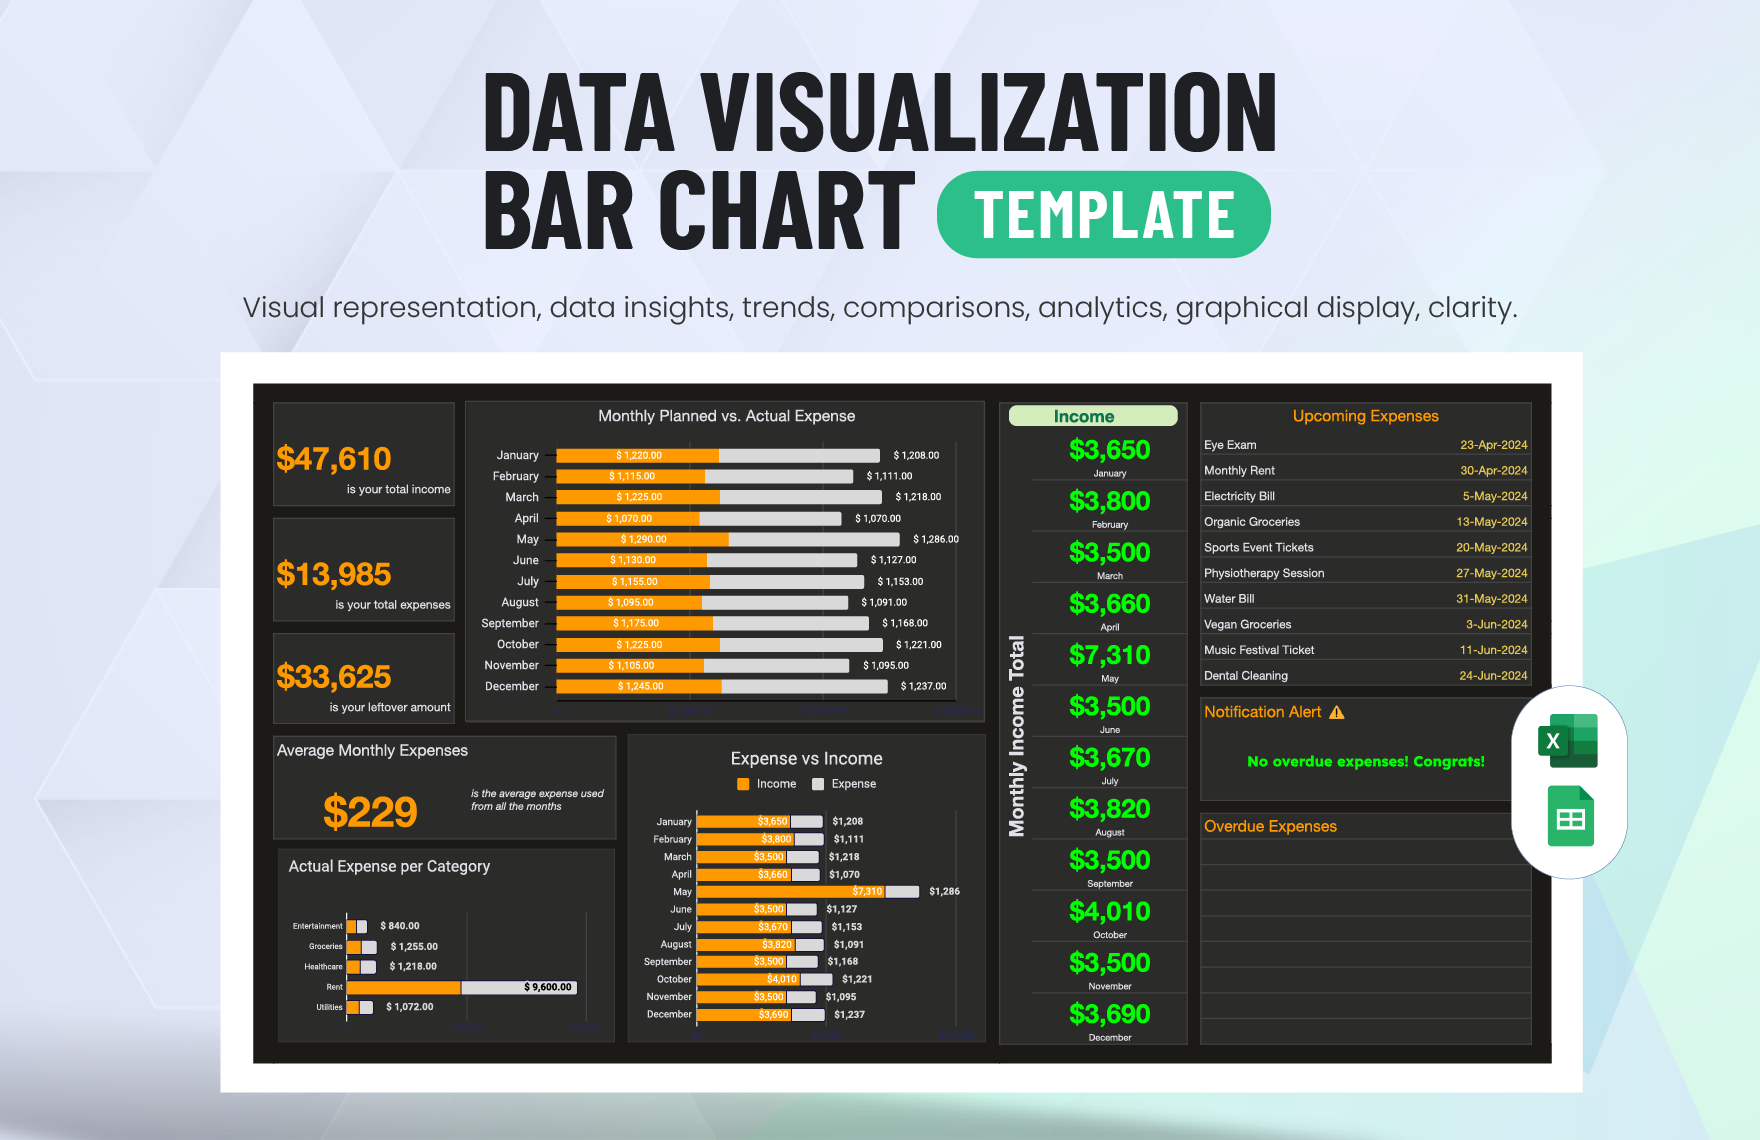 Data Visualization Bar Chart Template in Excel, Google Sheets